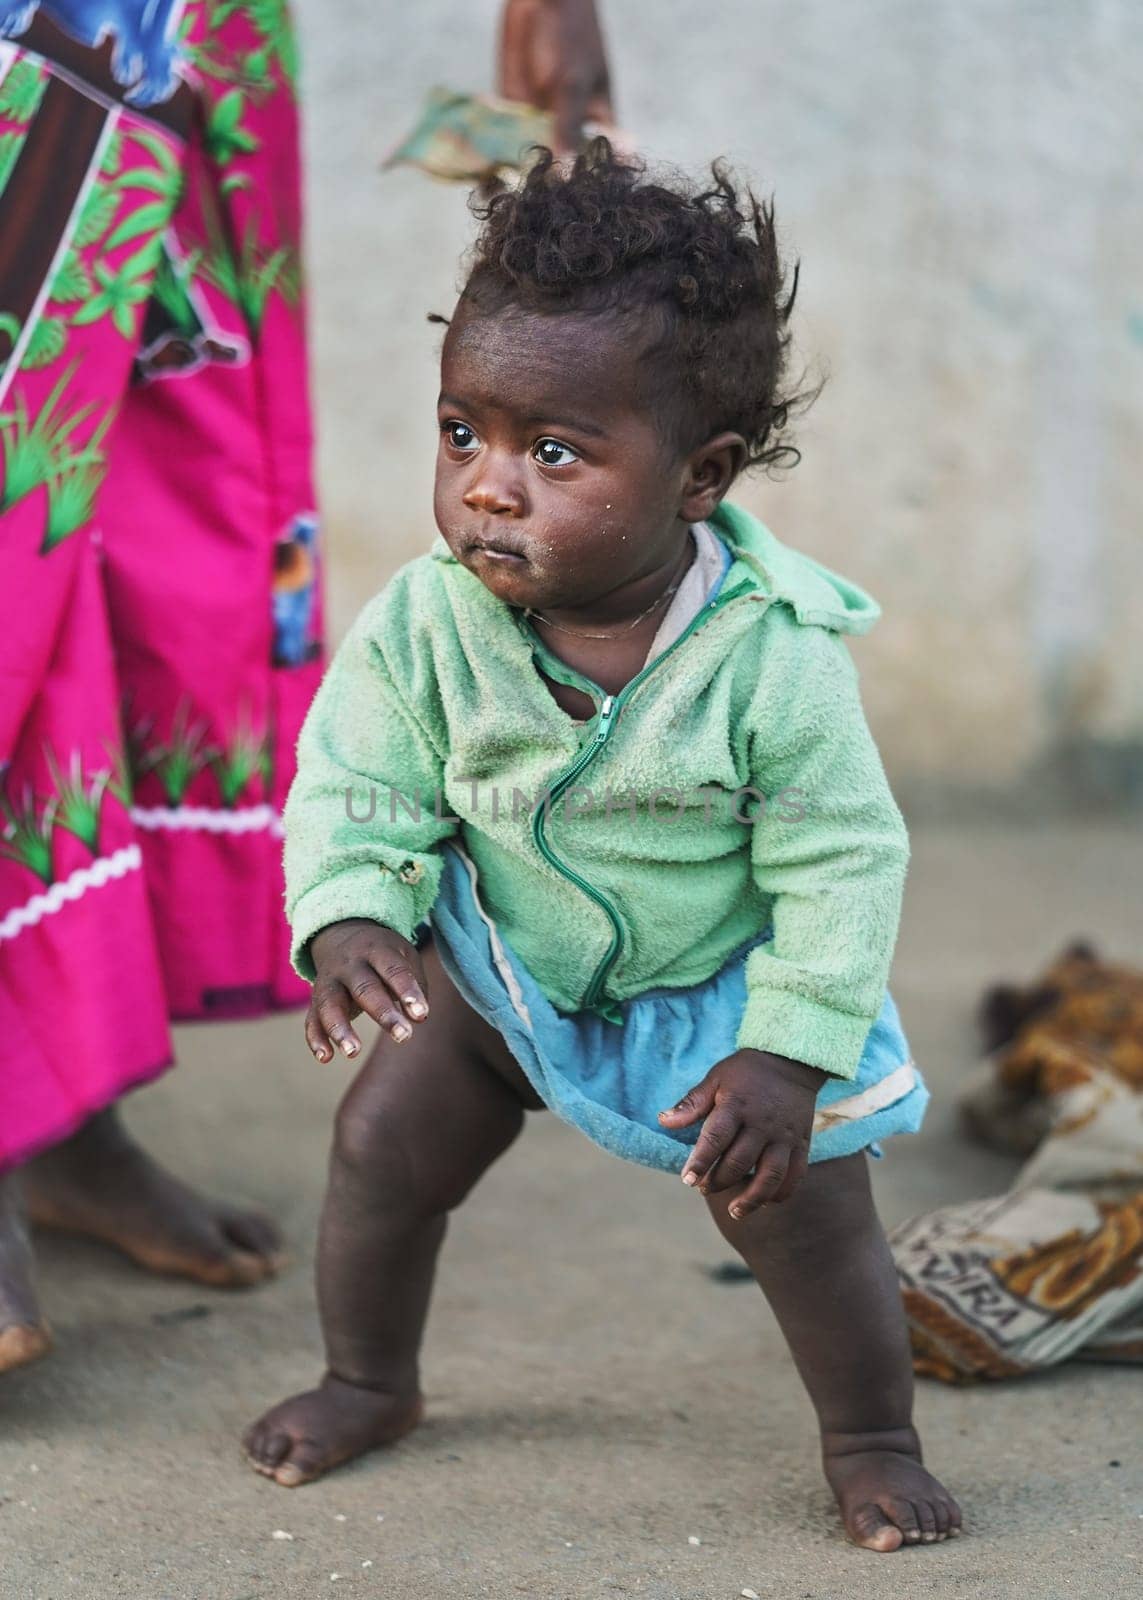 Ranohira, Madagascar - April 29, 2019: Unknown little Malagasy kid, barefoot, barely standing, mother stands near. People in Madagascar are poor but cheerful especially children